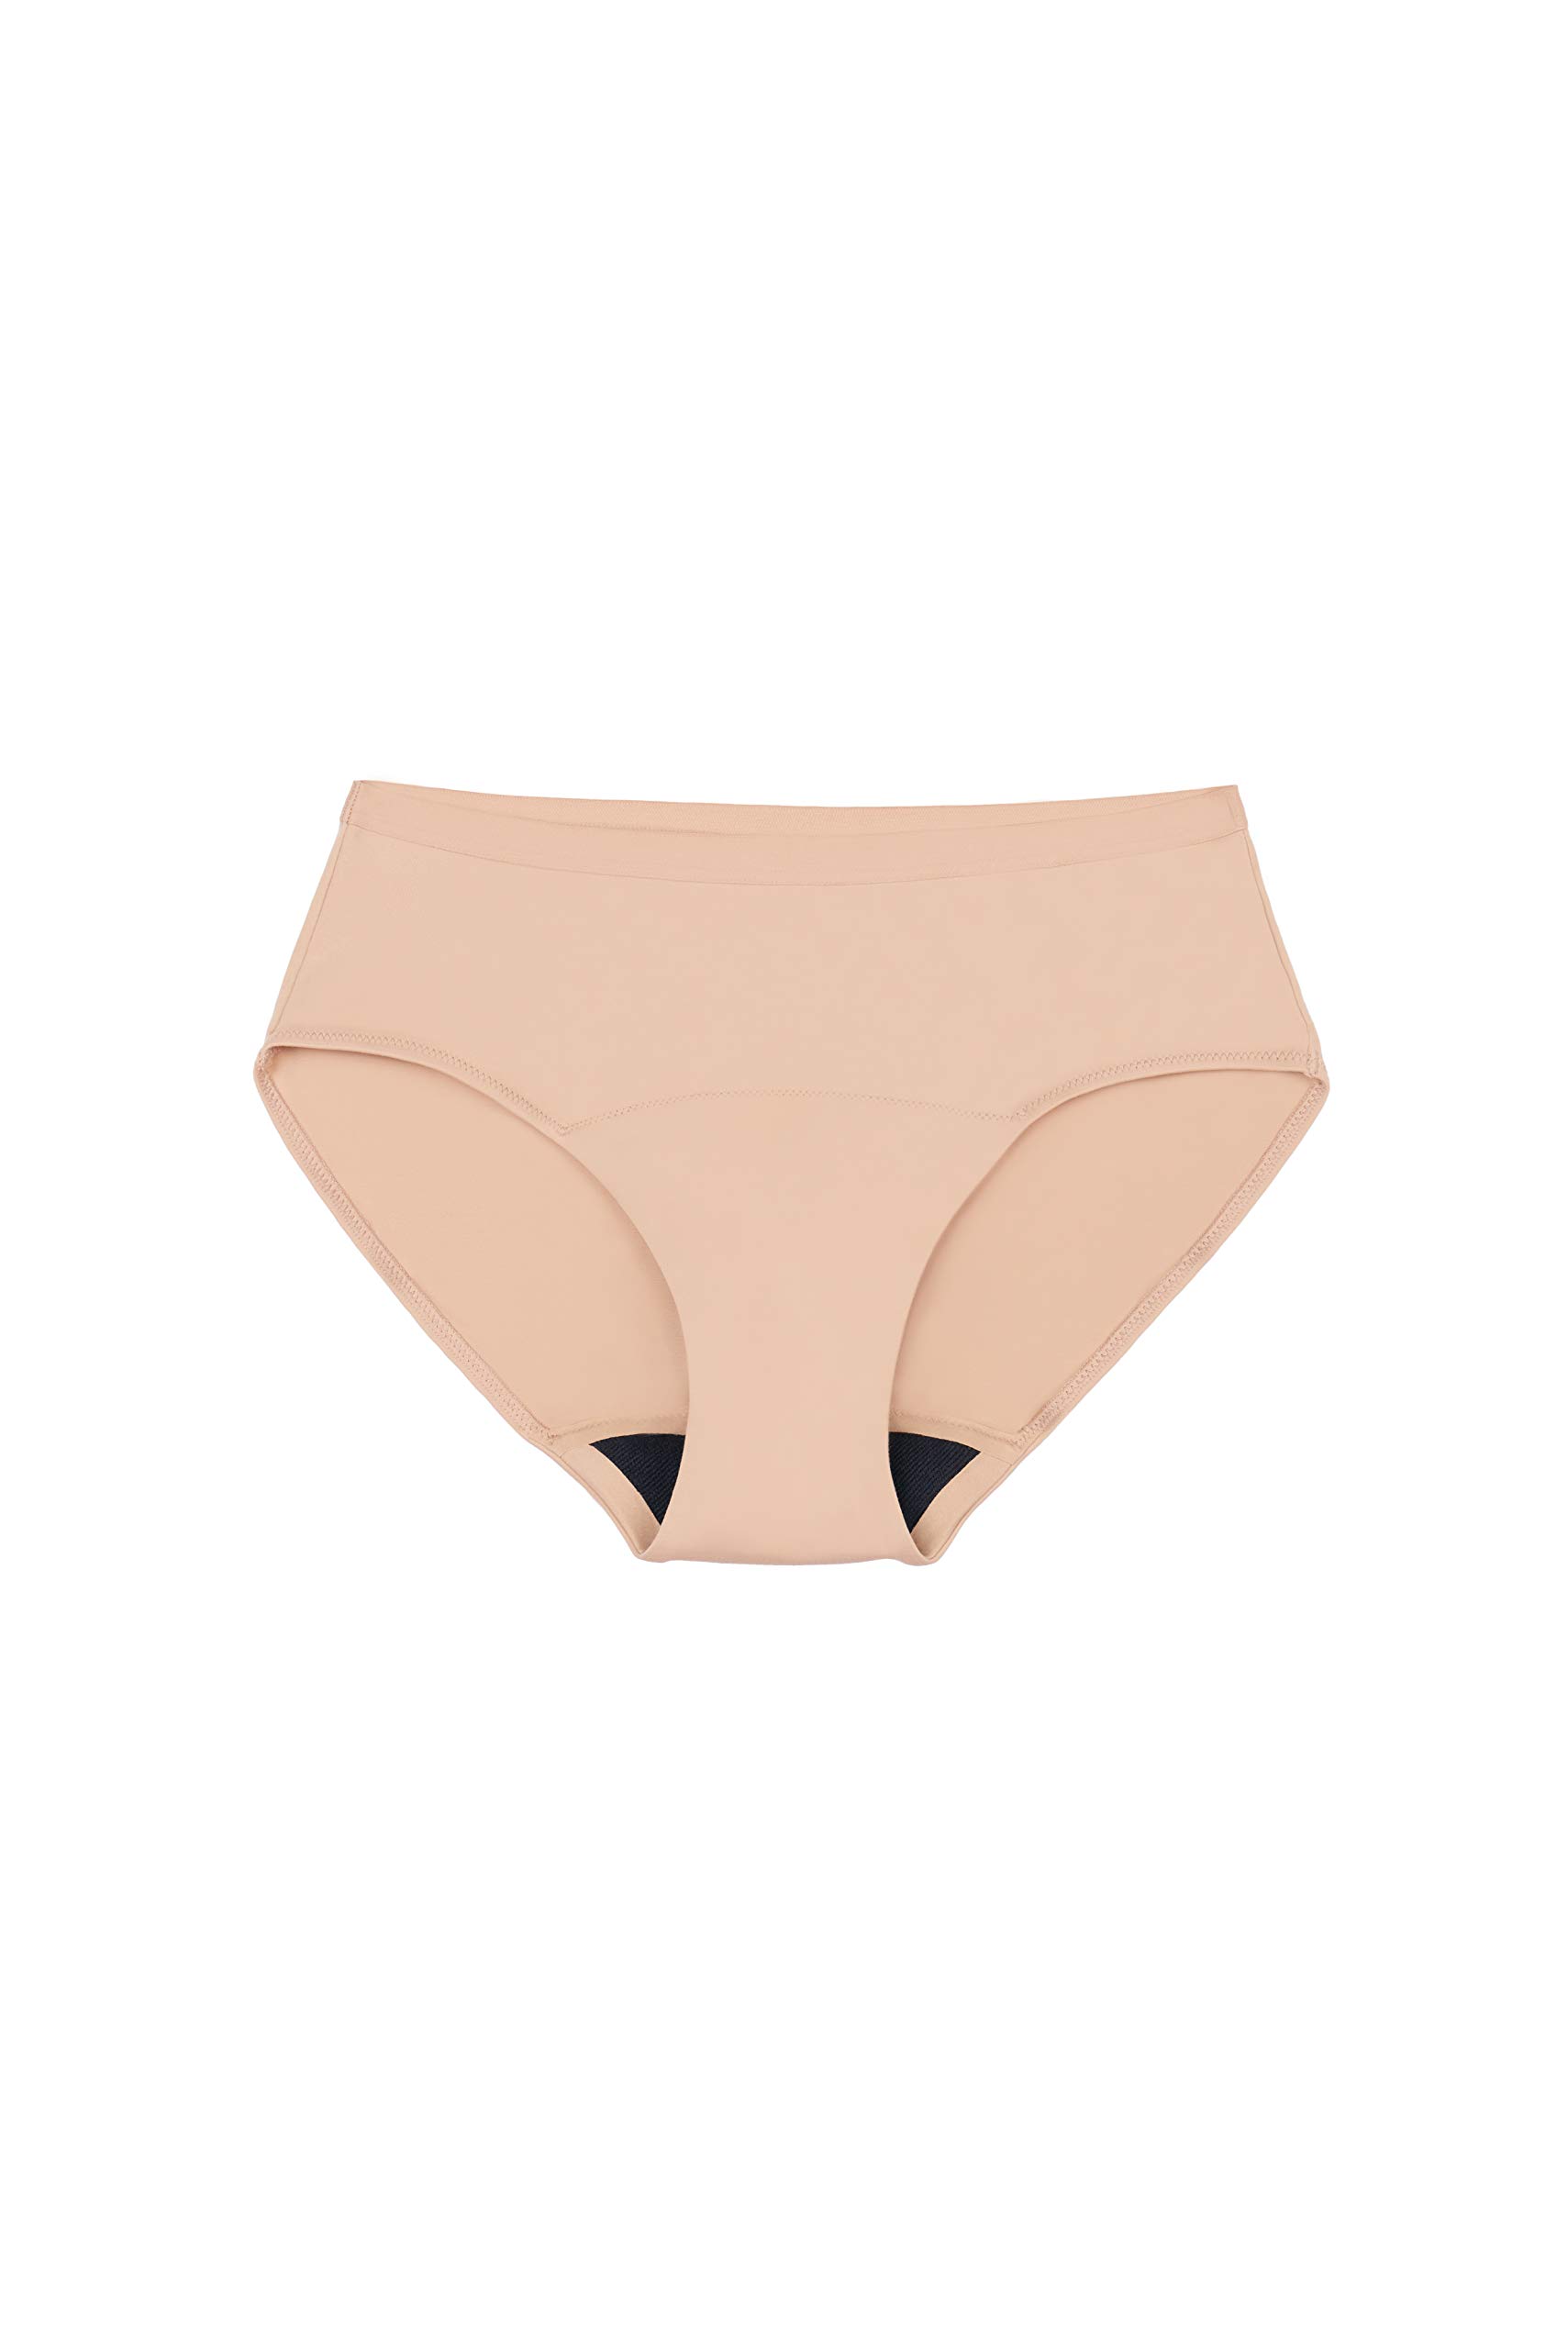 Thinx Hiphugger Period Underwear for Women Moderate Absorbency